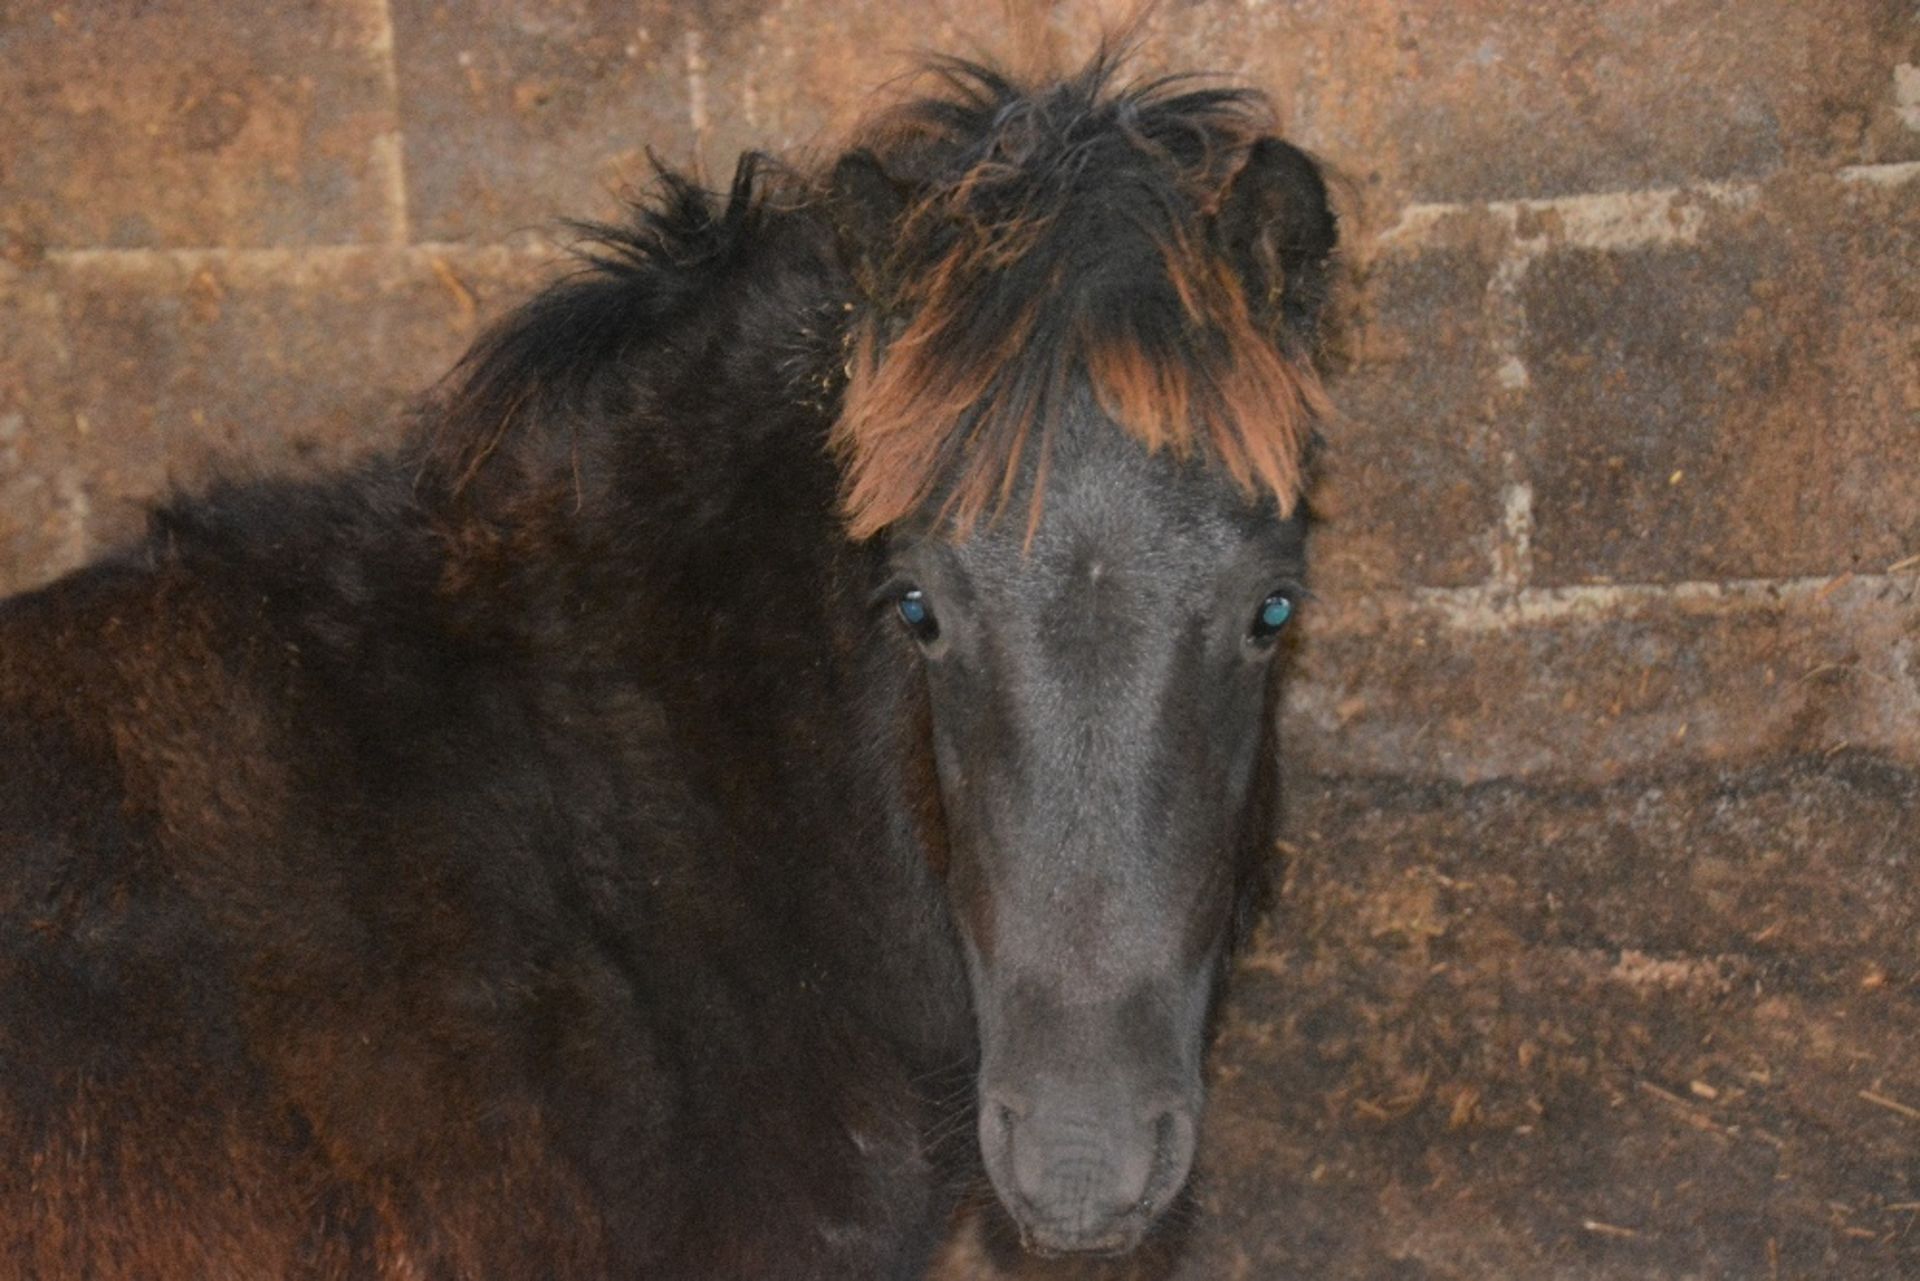 'BLACKATOR KEIRA' DARTMOOR HILL PONY DARK BAY FILLY APPROX 6 MONTHS OLD - Image 5 of 10